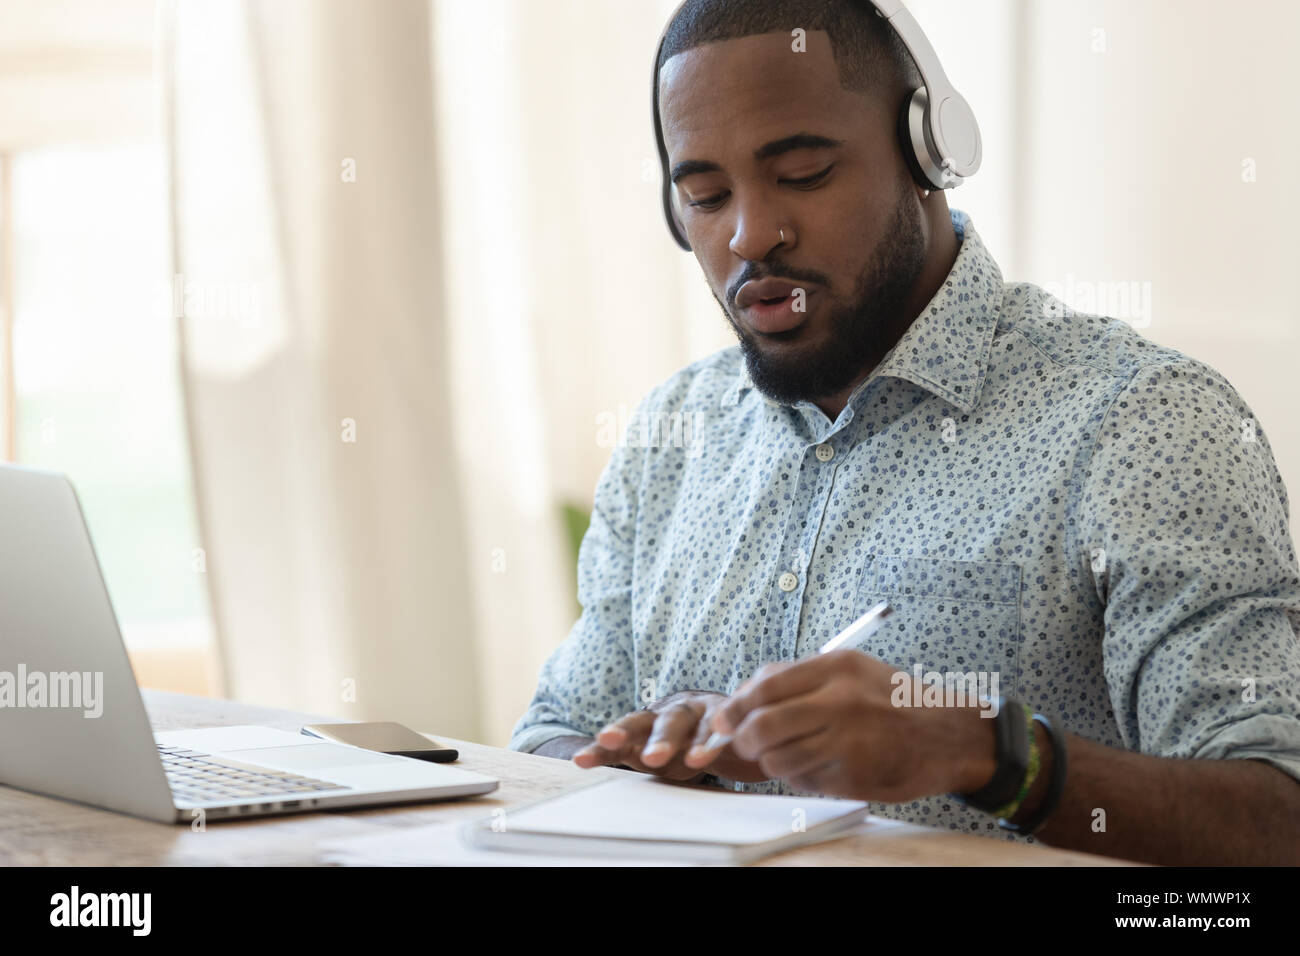 Focused black guy busy with certification training. Stock Photo